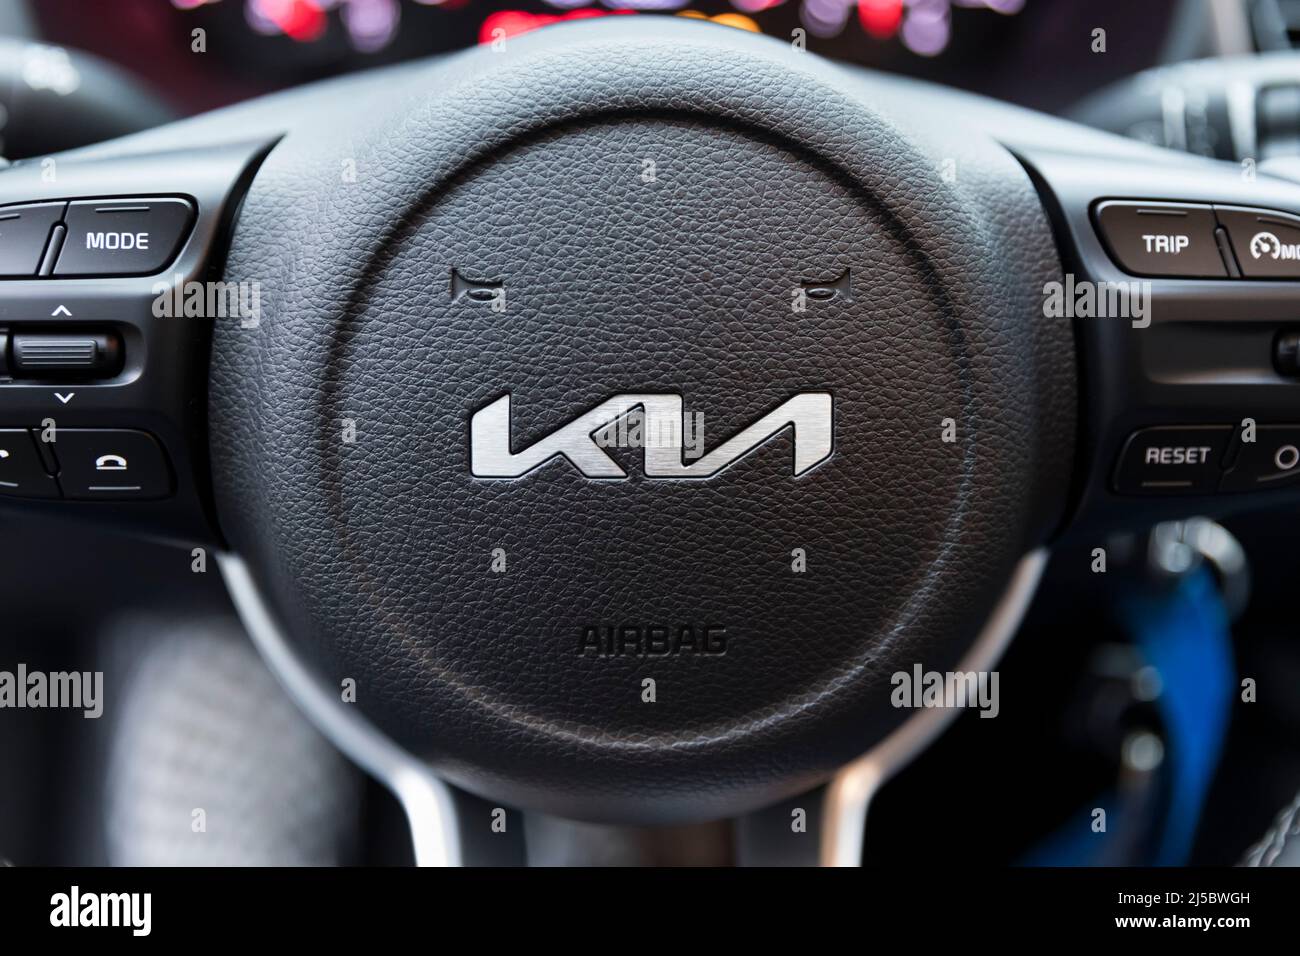 Stade, Germany –January 7, 2022: New KIA brand logo on steering wheel of compact car manufactured by the South Korean company. Stock Photo